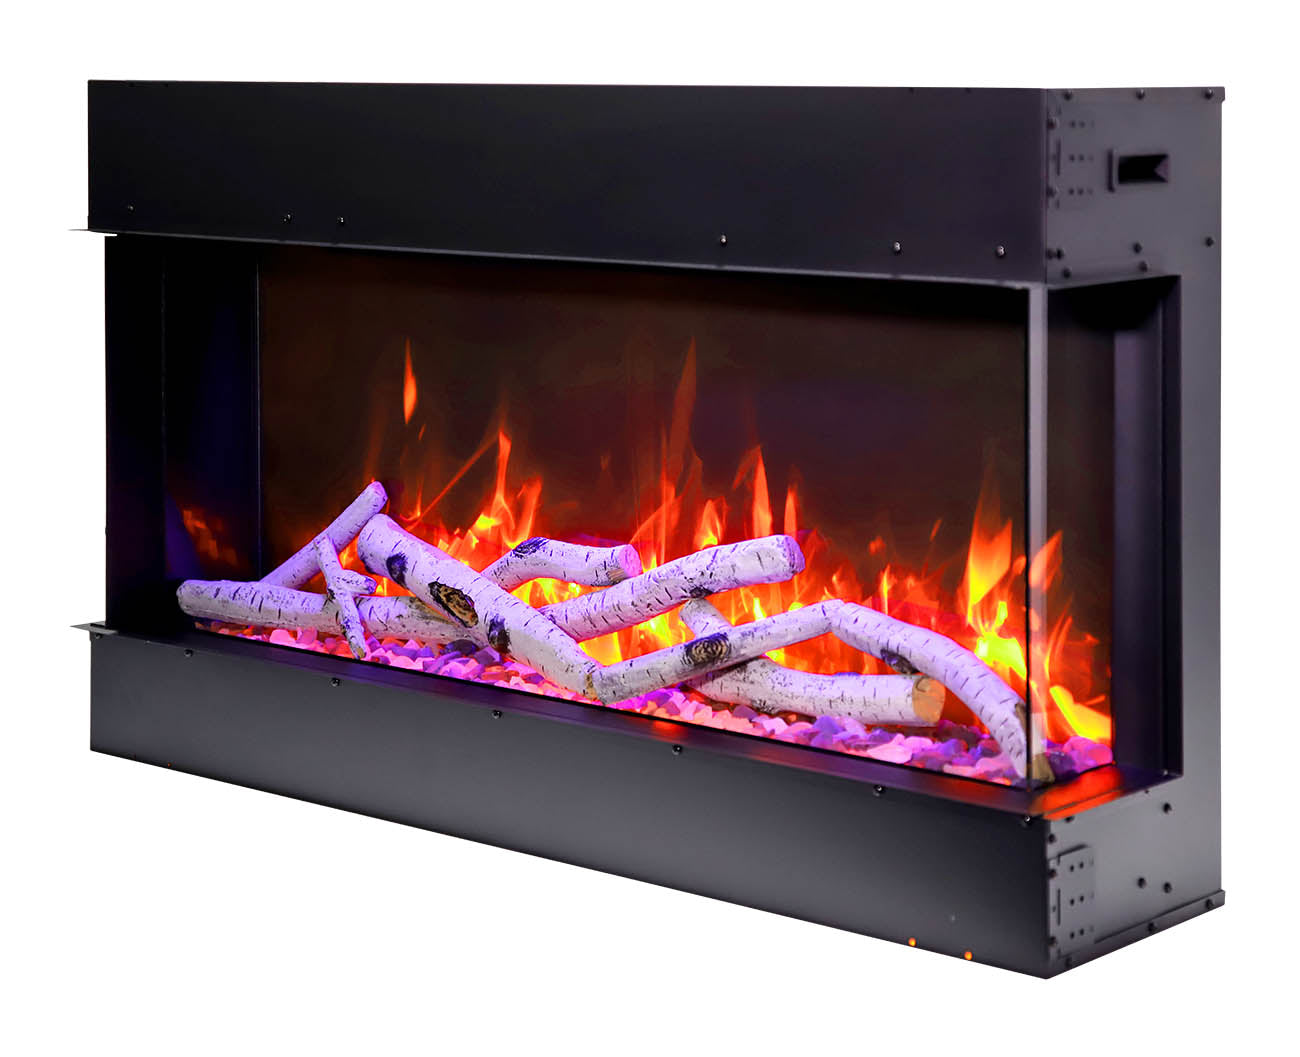 Remii by Amantii 60" BAY-SLIM Series 3 Sided Glass Electric Fireplace- 60-BAY-SLIM- Left View With Birch Log Orange Flame